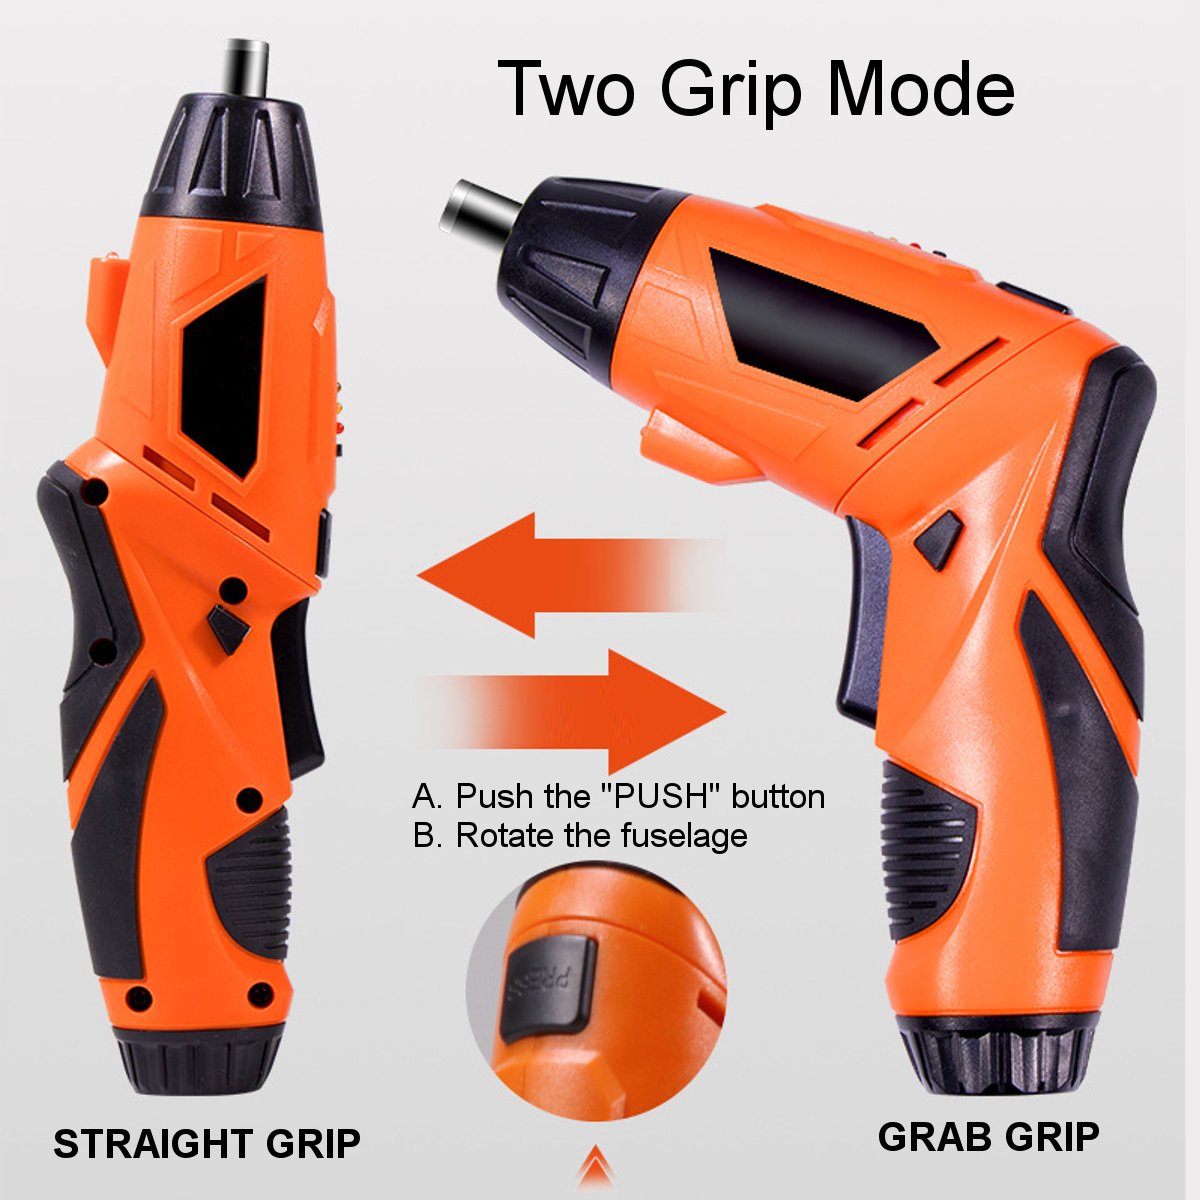 47-in-1-Rechargeable-Wireless-Cordless-Electric-Screwdriver-Drill-Kit-Power-Tool-Home-Improvement-DI-1780811-4